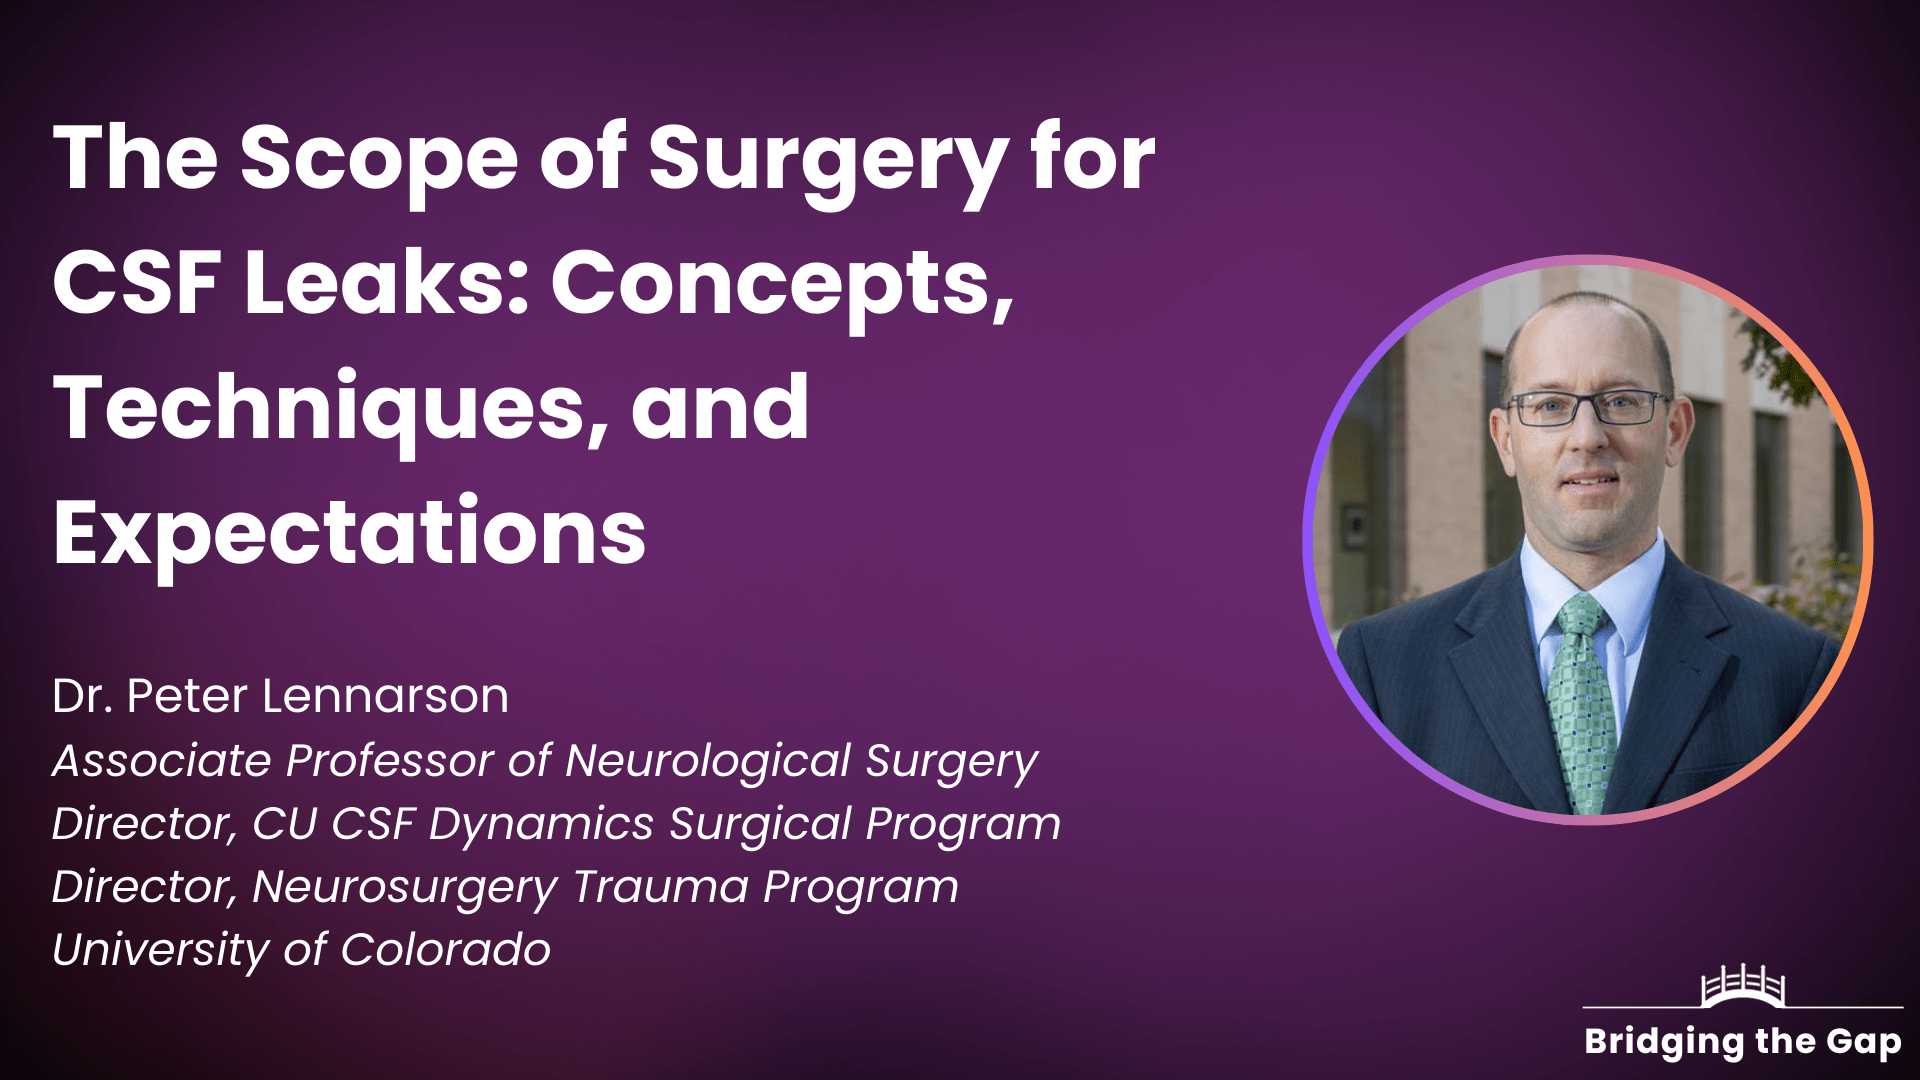 Dr. Peter Lennarson: The Scope of Surgery for CSF Leaks